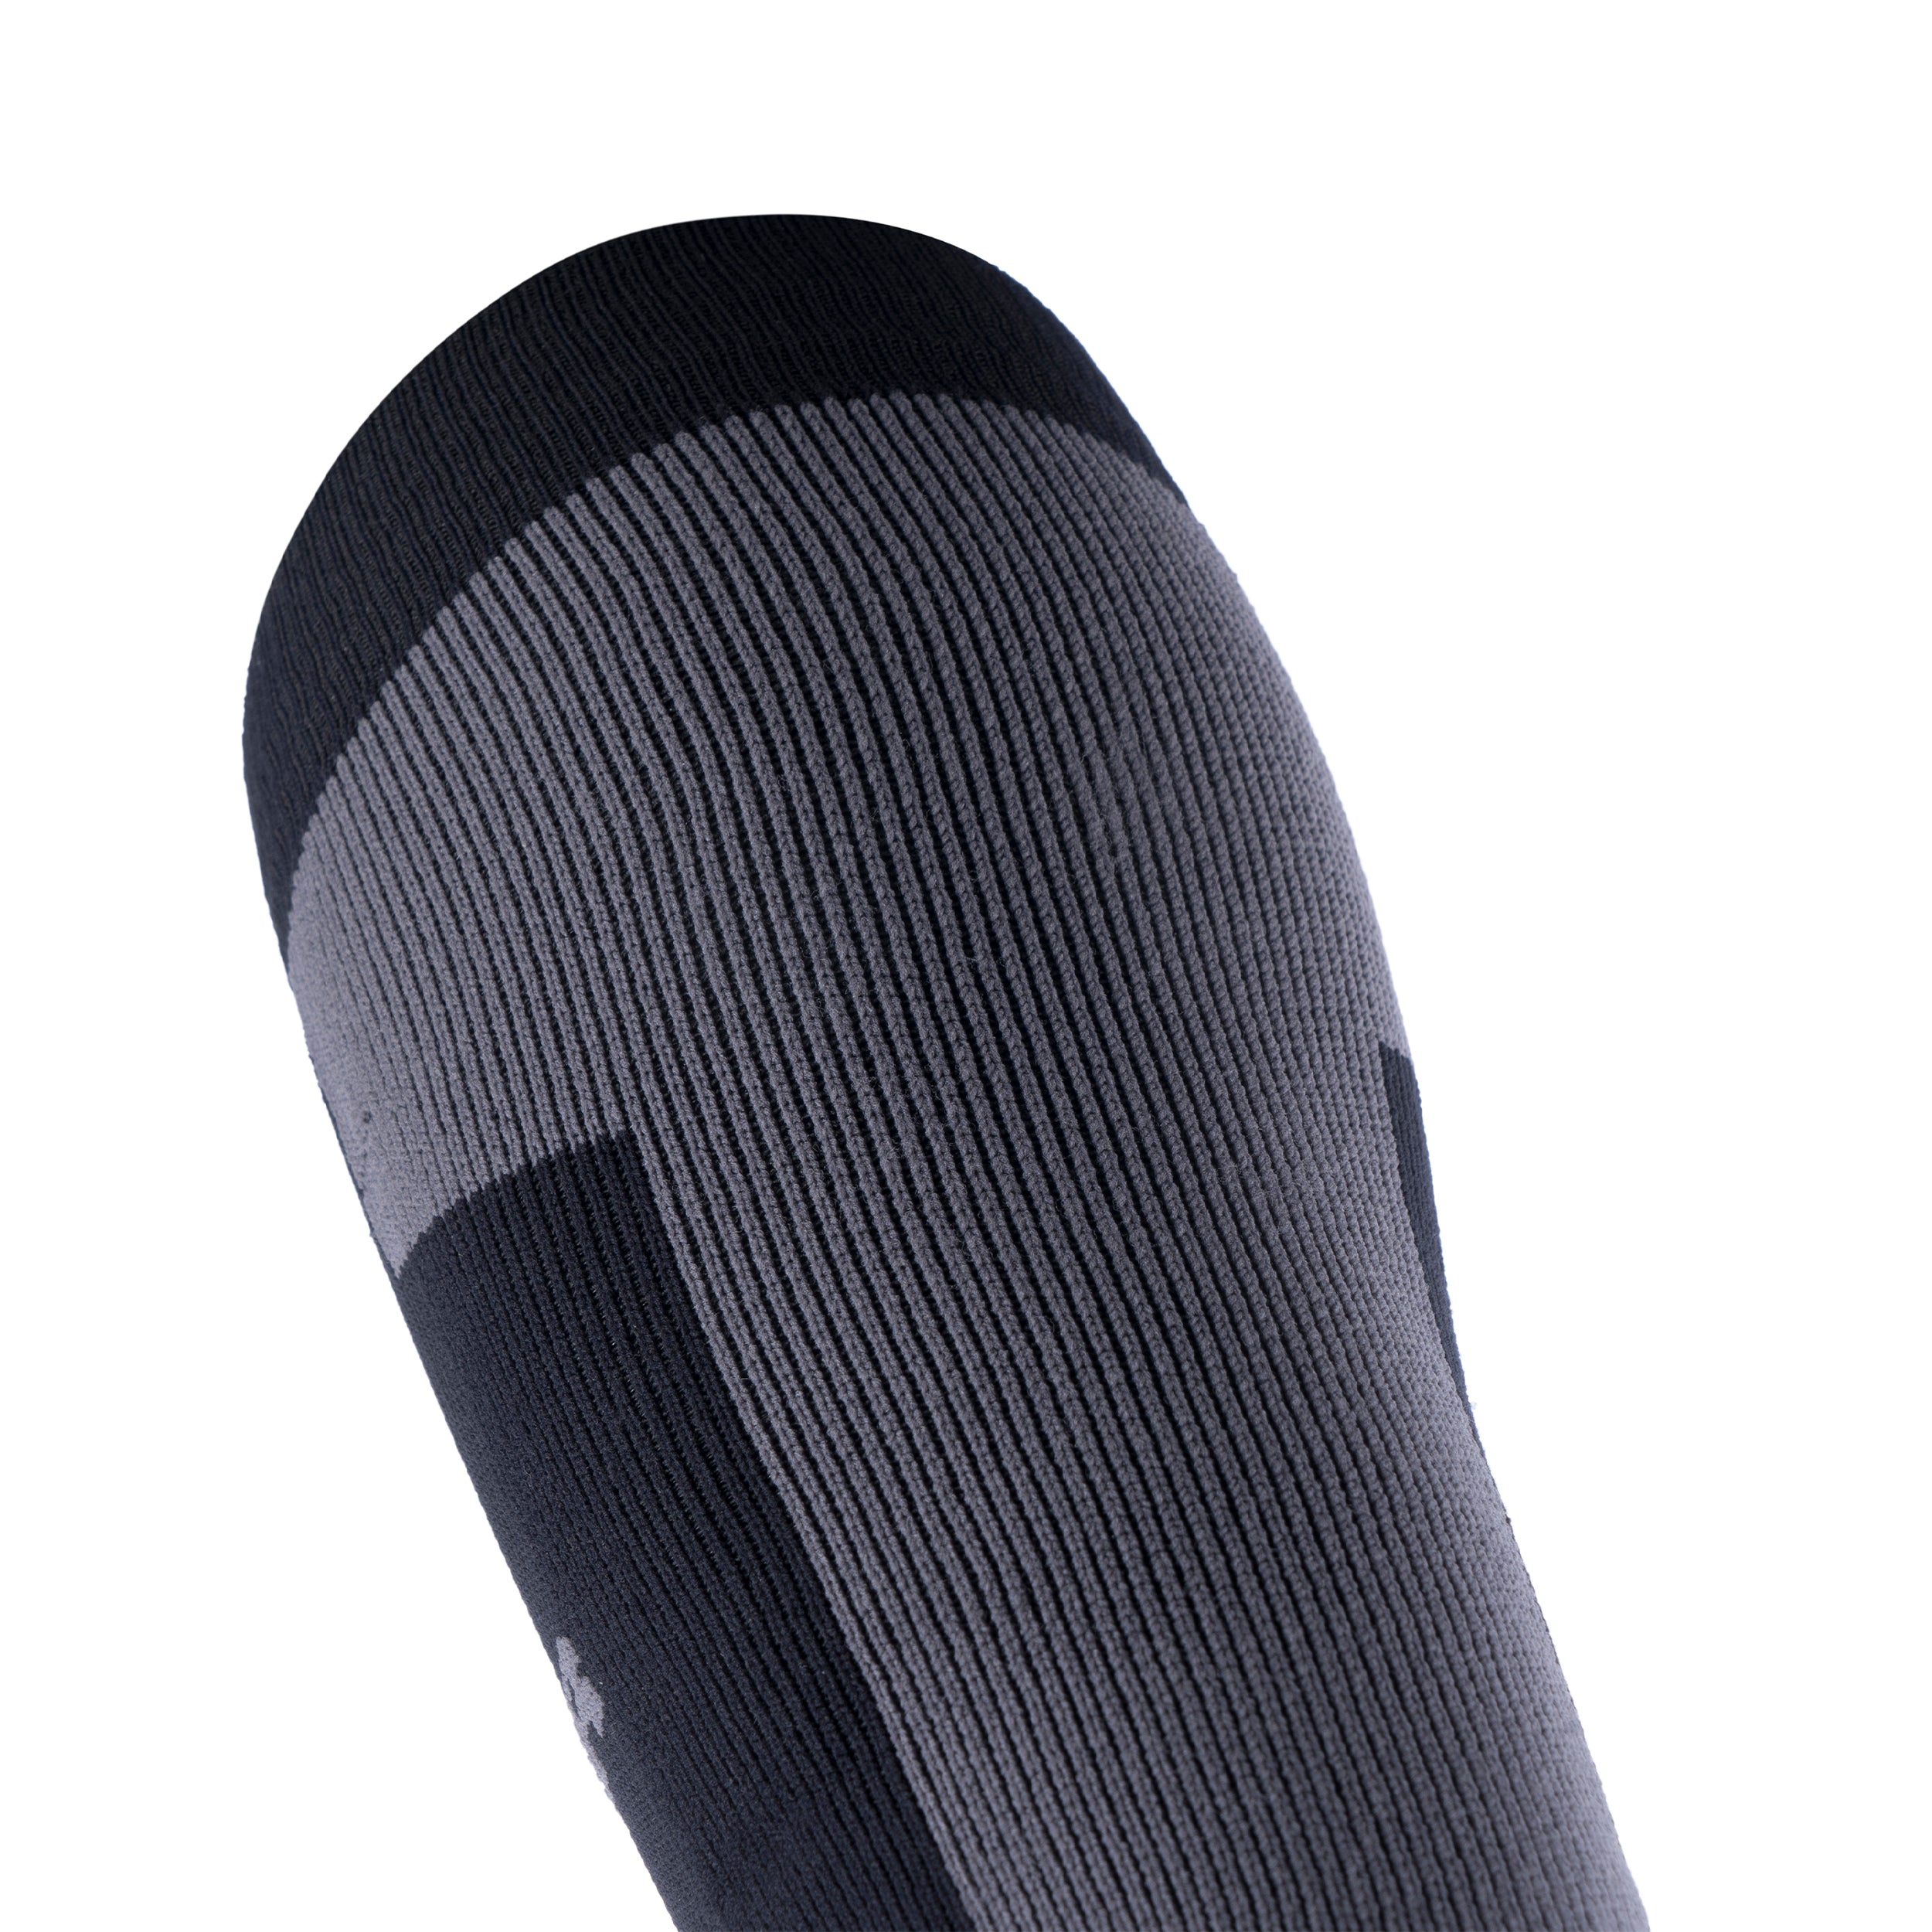 China Sports Padded Calf Sleeve Protective Leg Compression Sleeve Running Calf  Support Factory and Manufacturer